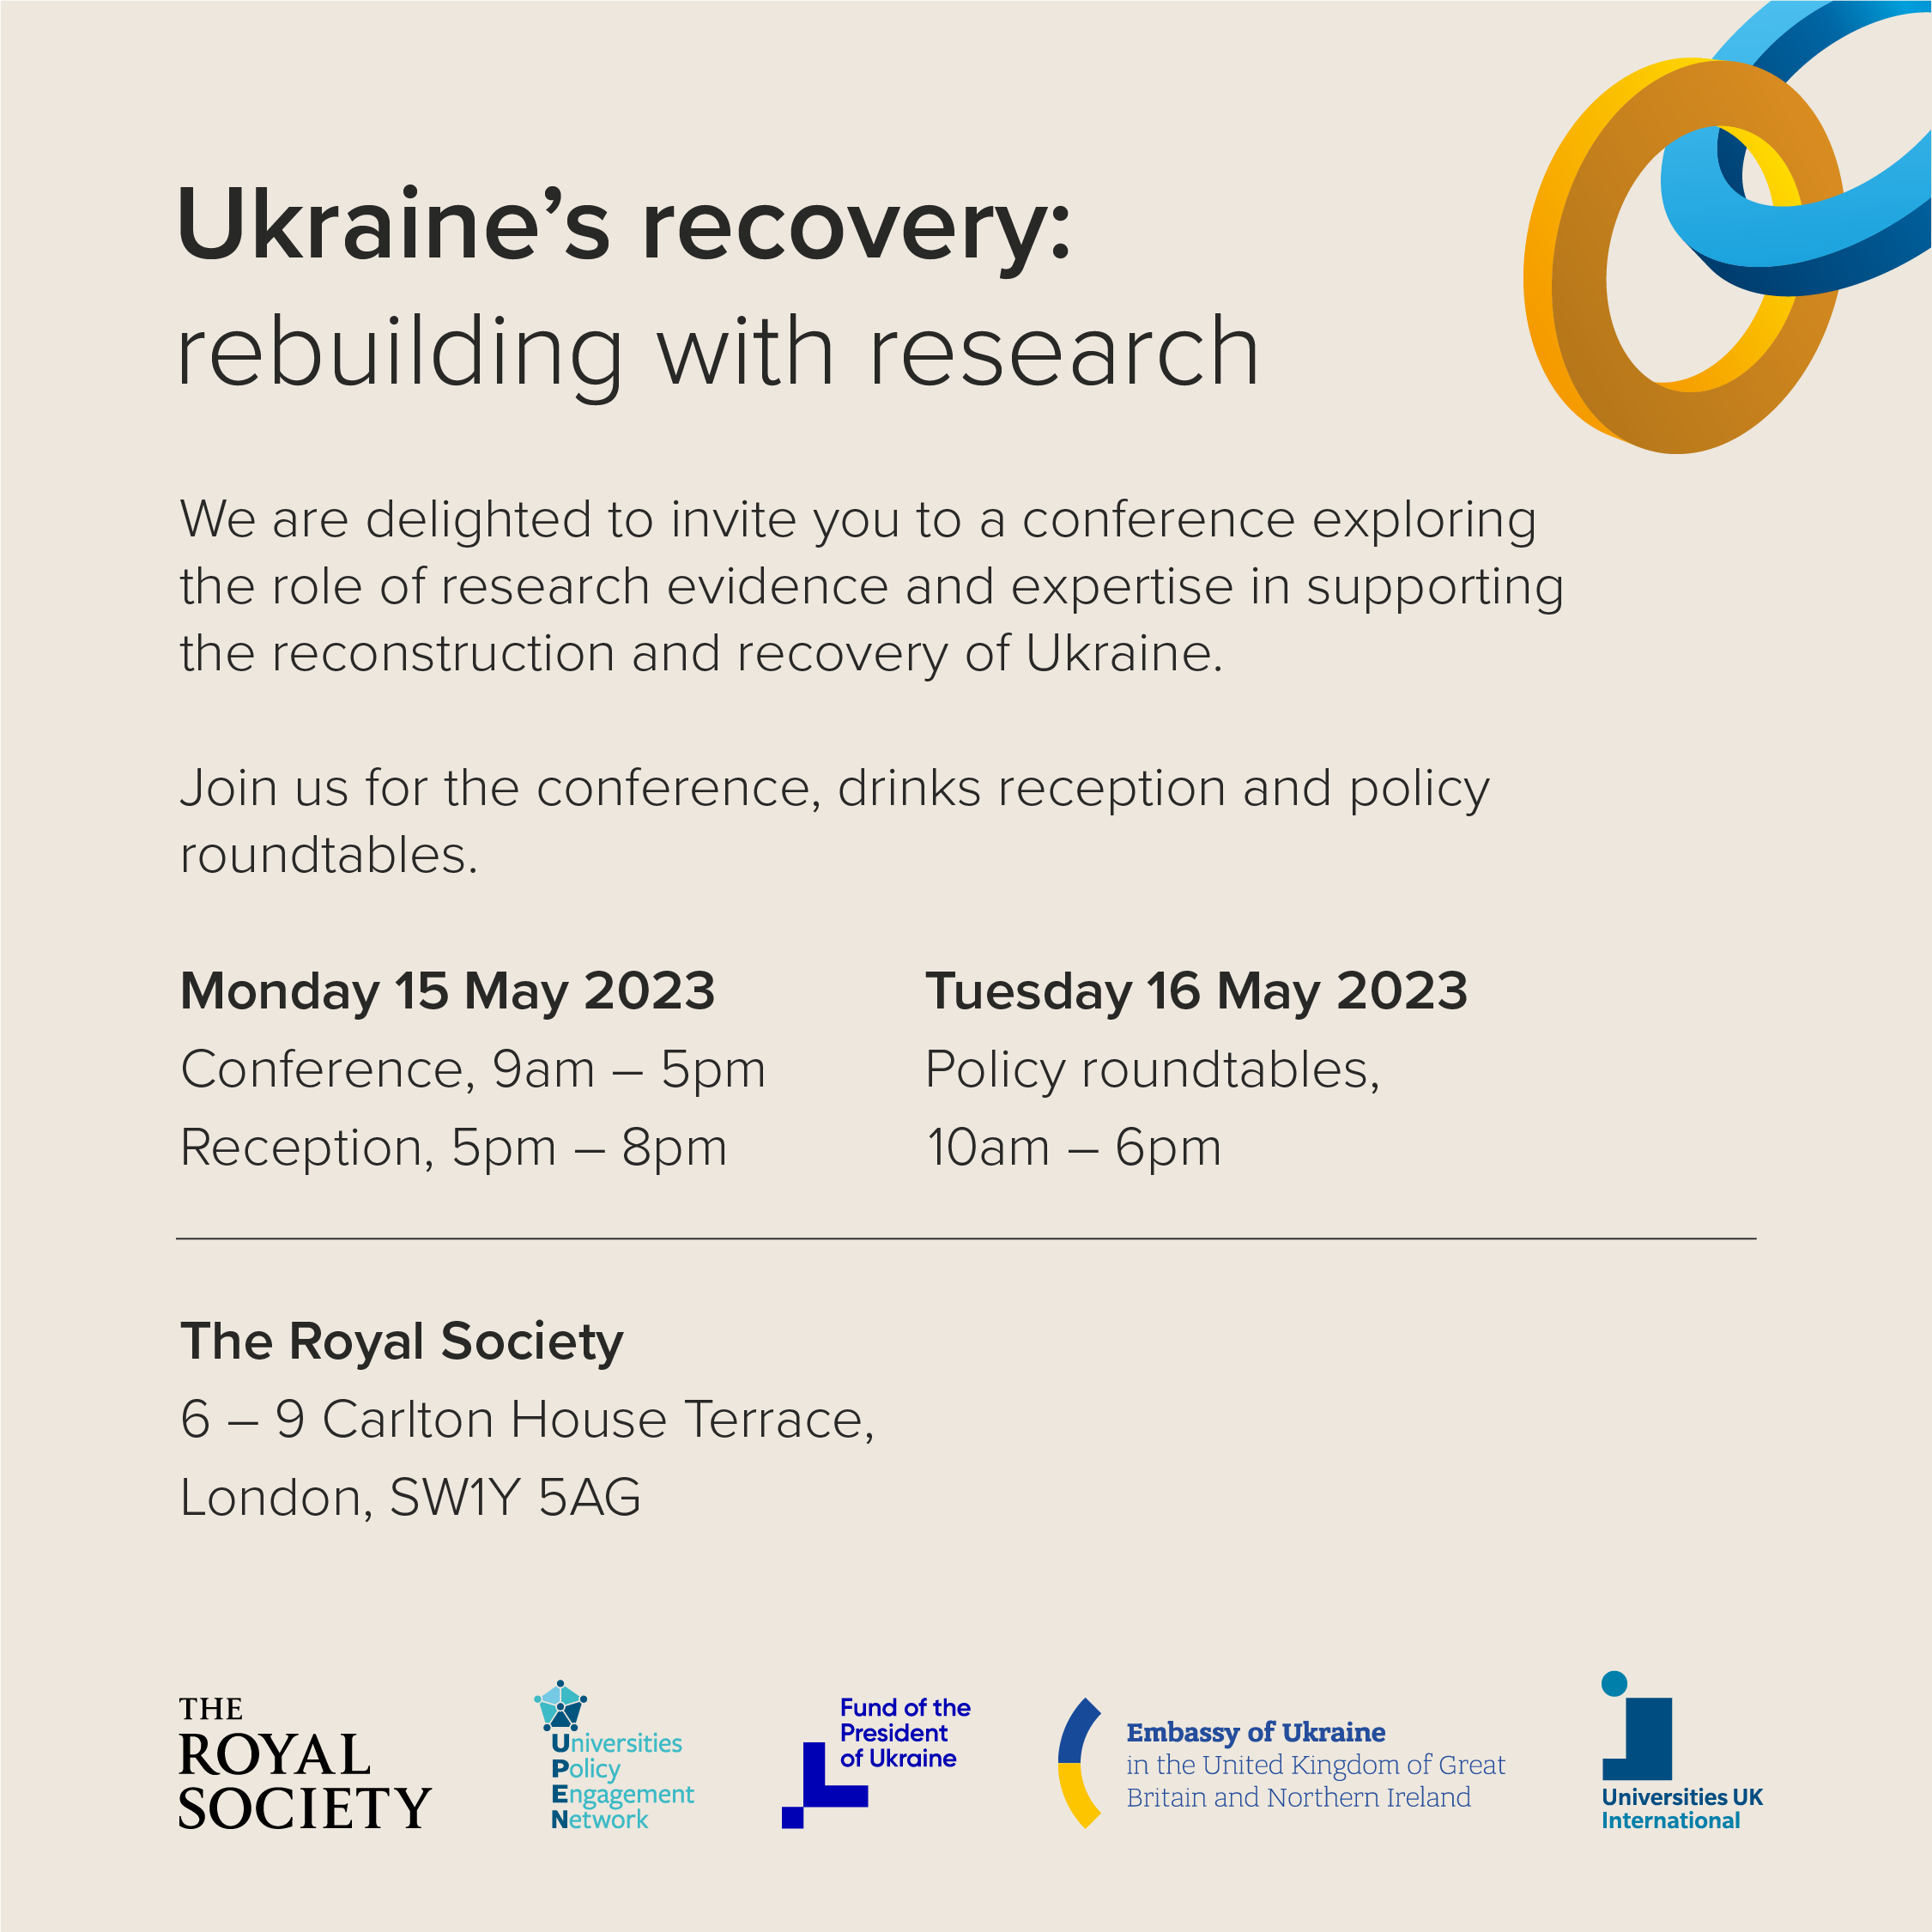 Ukraine's recovery: rebuilding with research